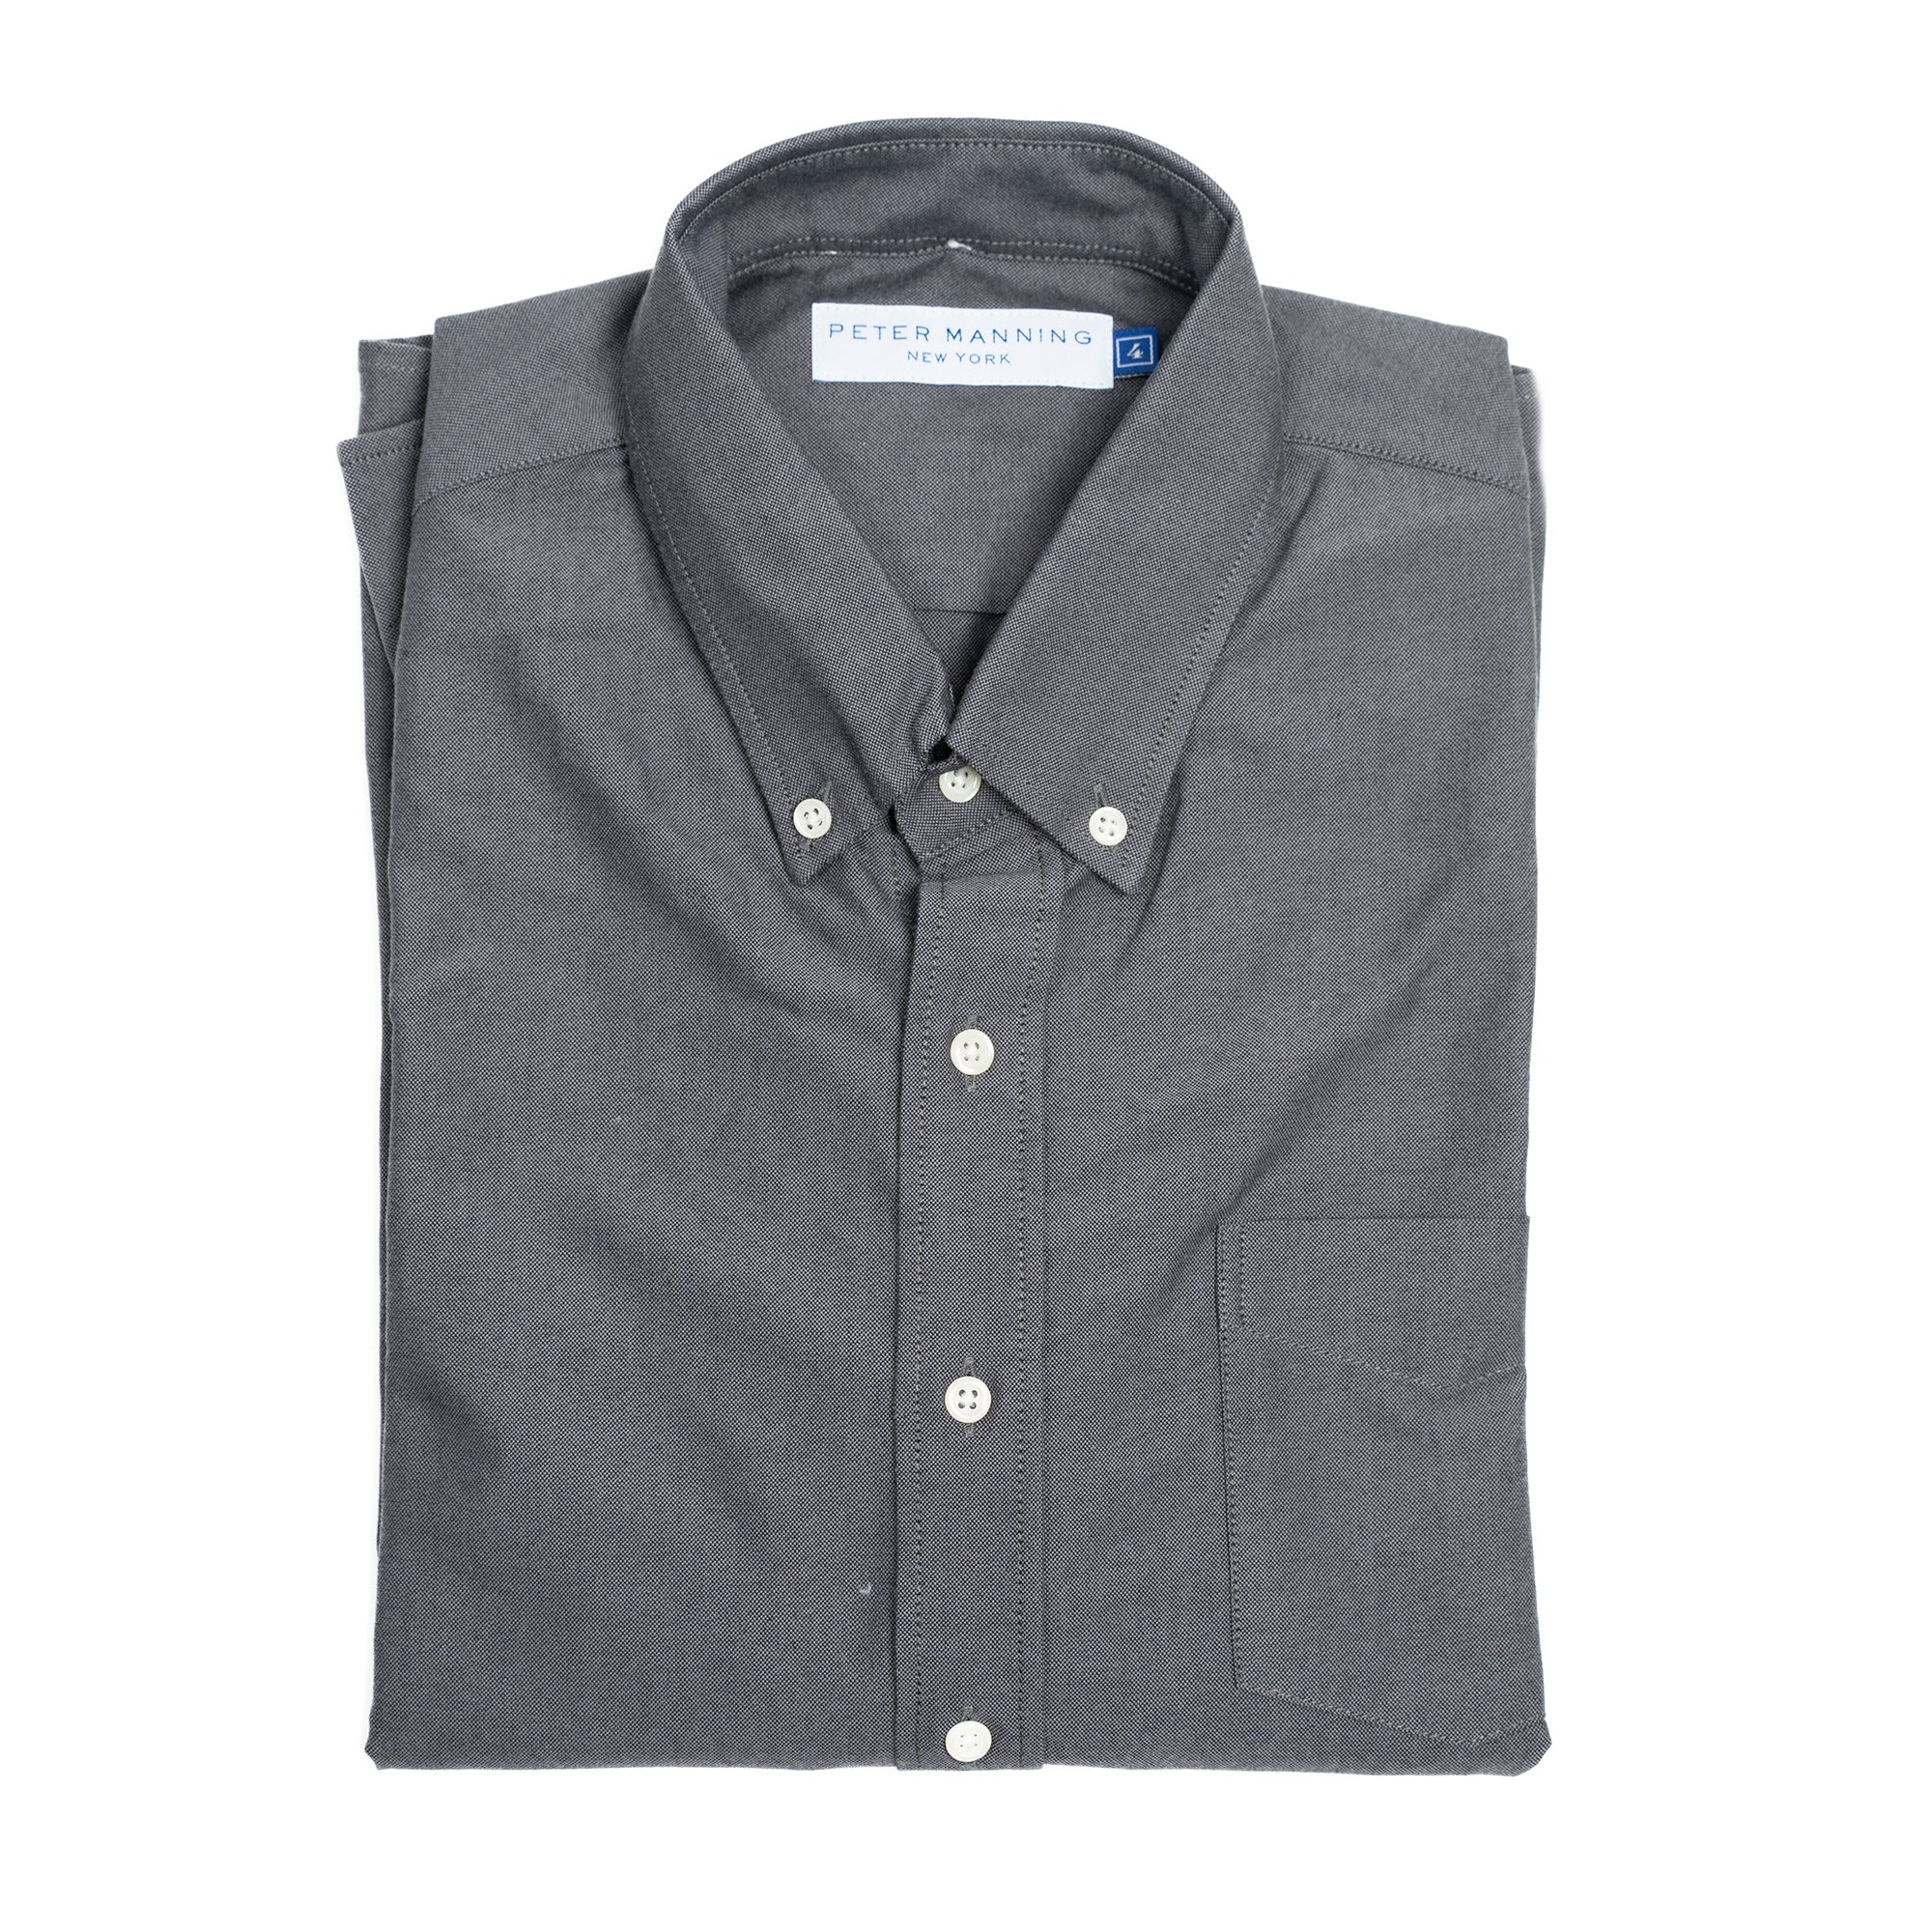 Weekend Oxford Standard Fit, Charcoal | Peter Manning NYC